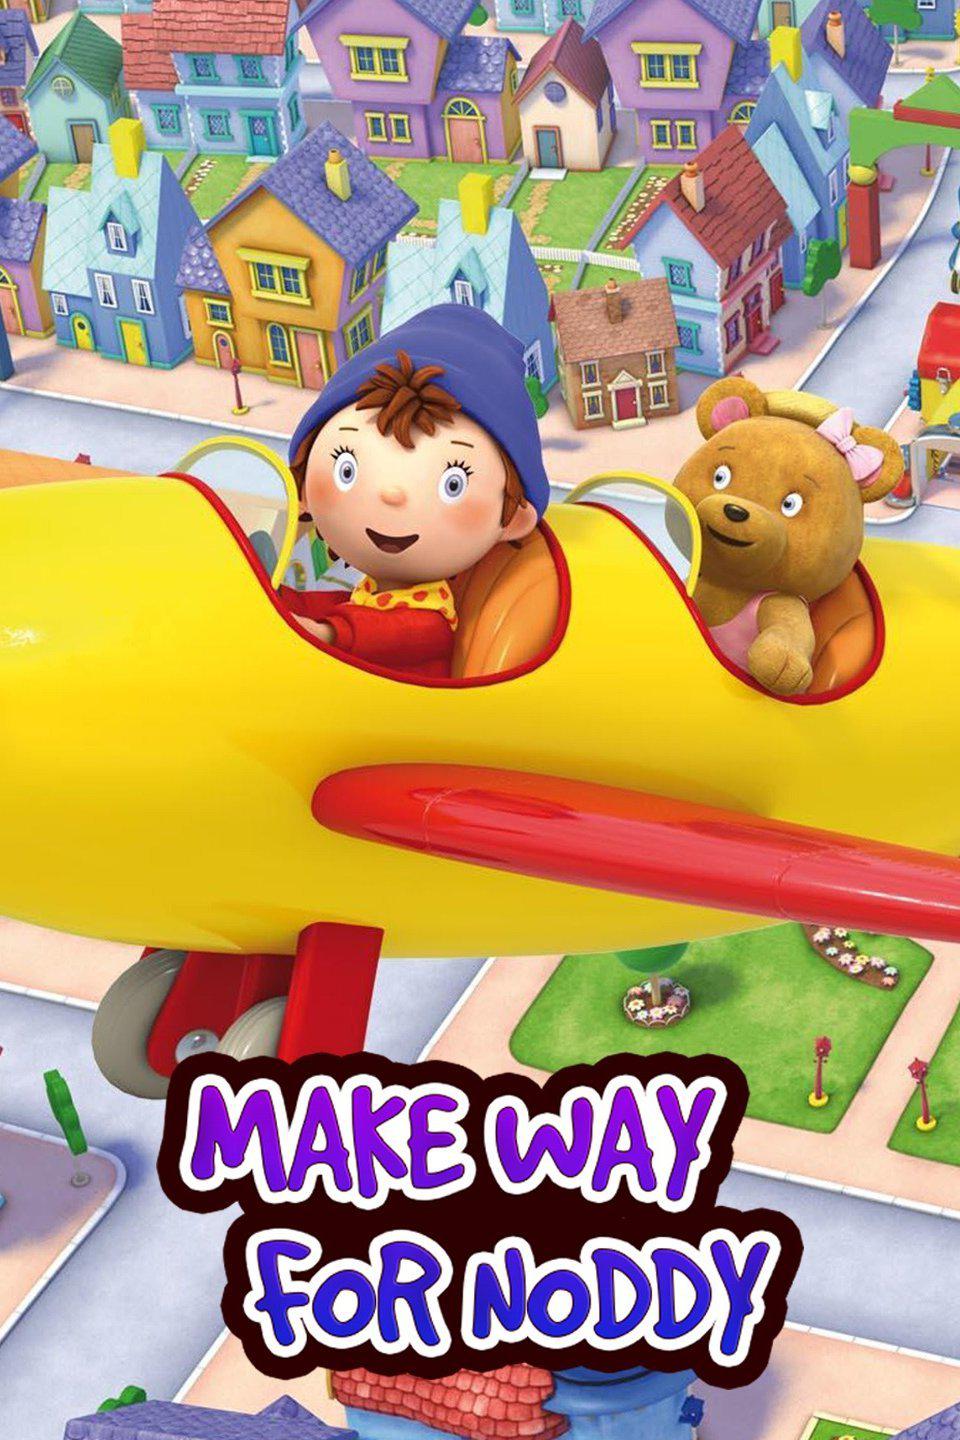 TV ratings for Make Way For Noddy in Poland. PBS Kids TV series